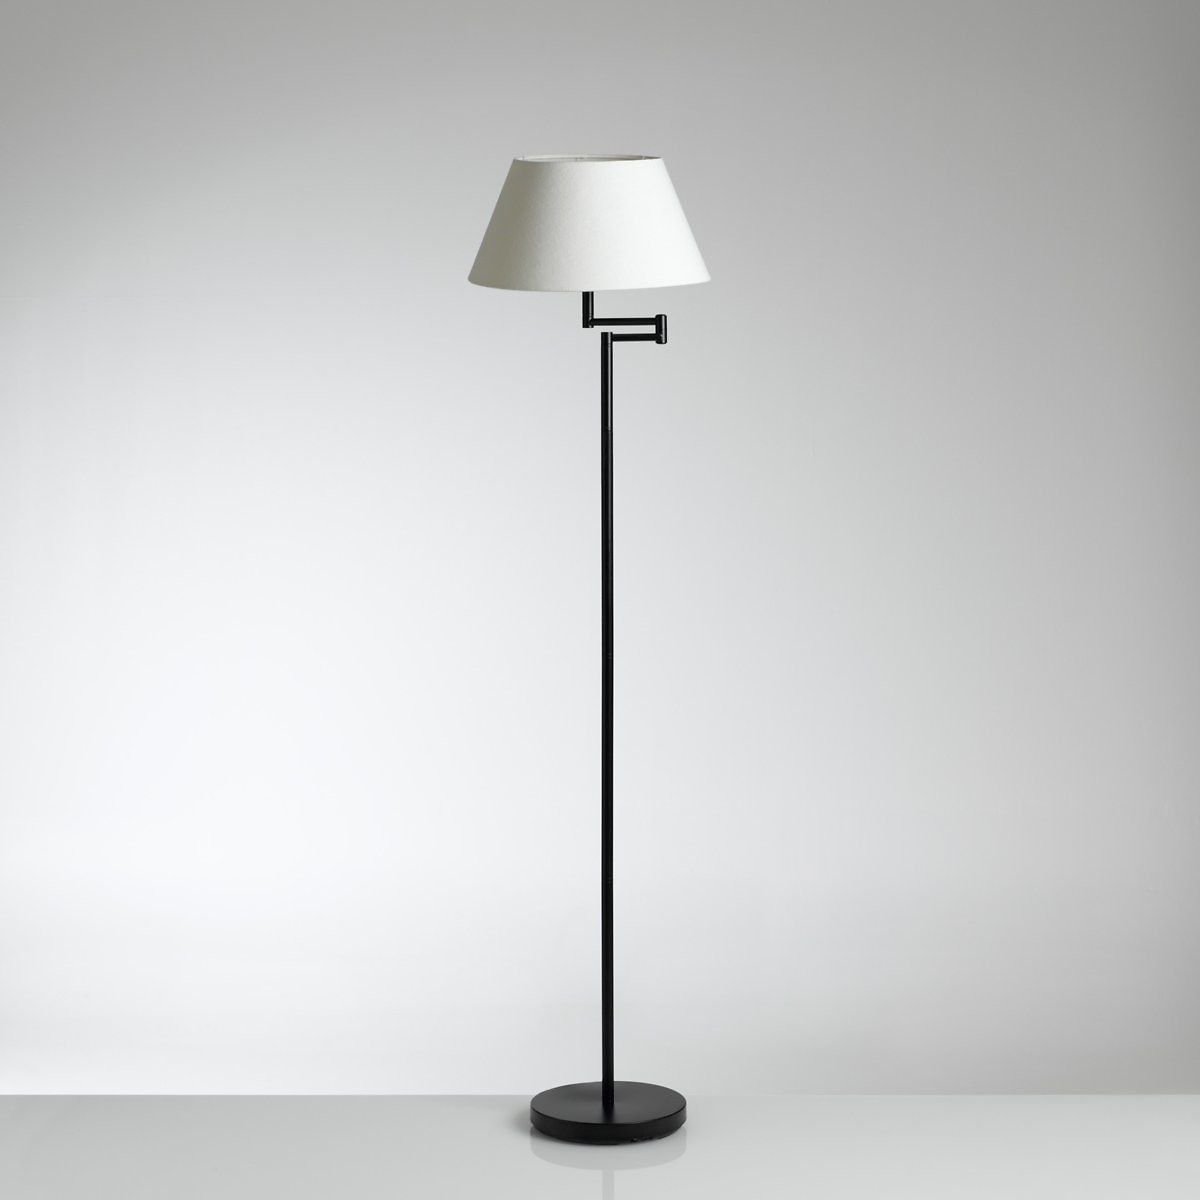 Nyna Floor Lamp with Articulated Arm | La Redoute (UK)